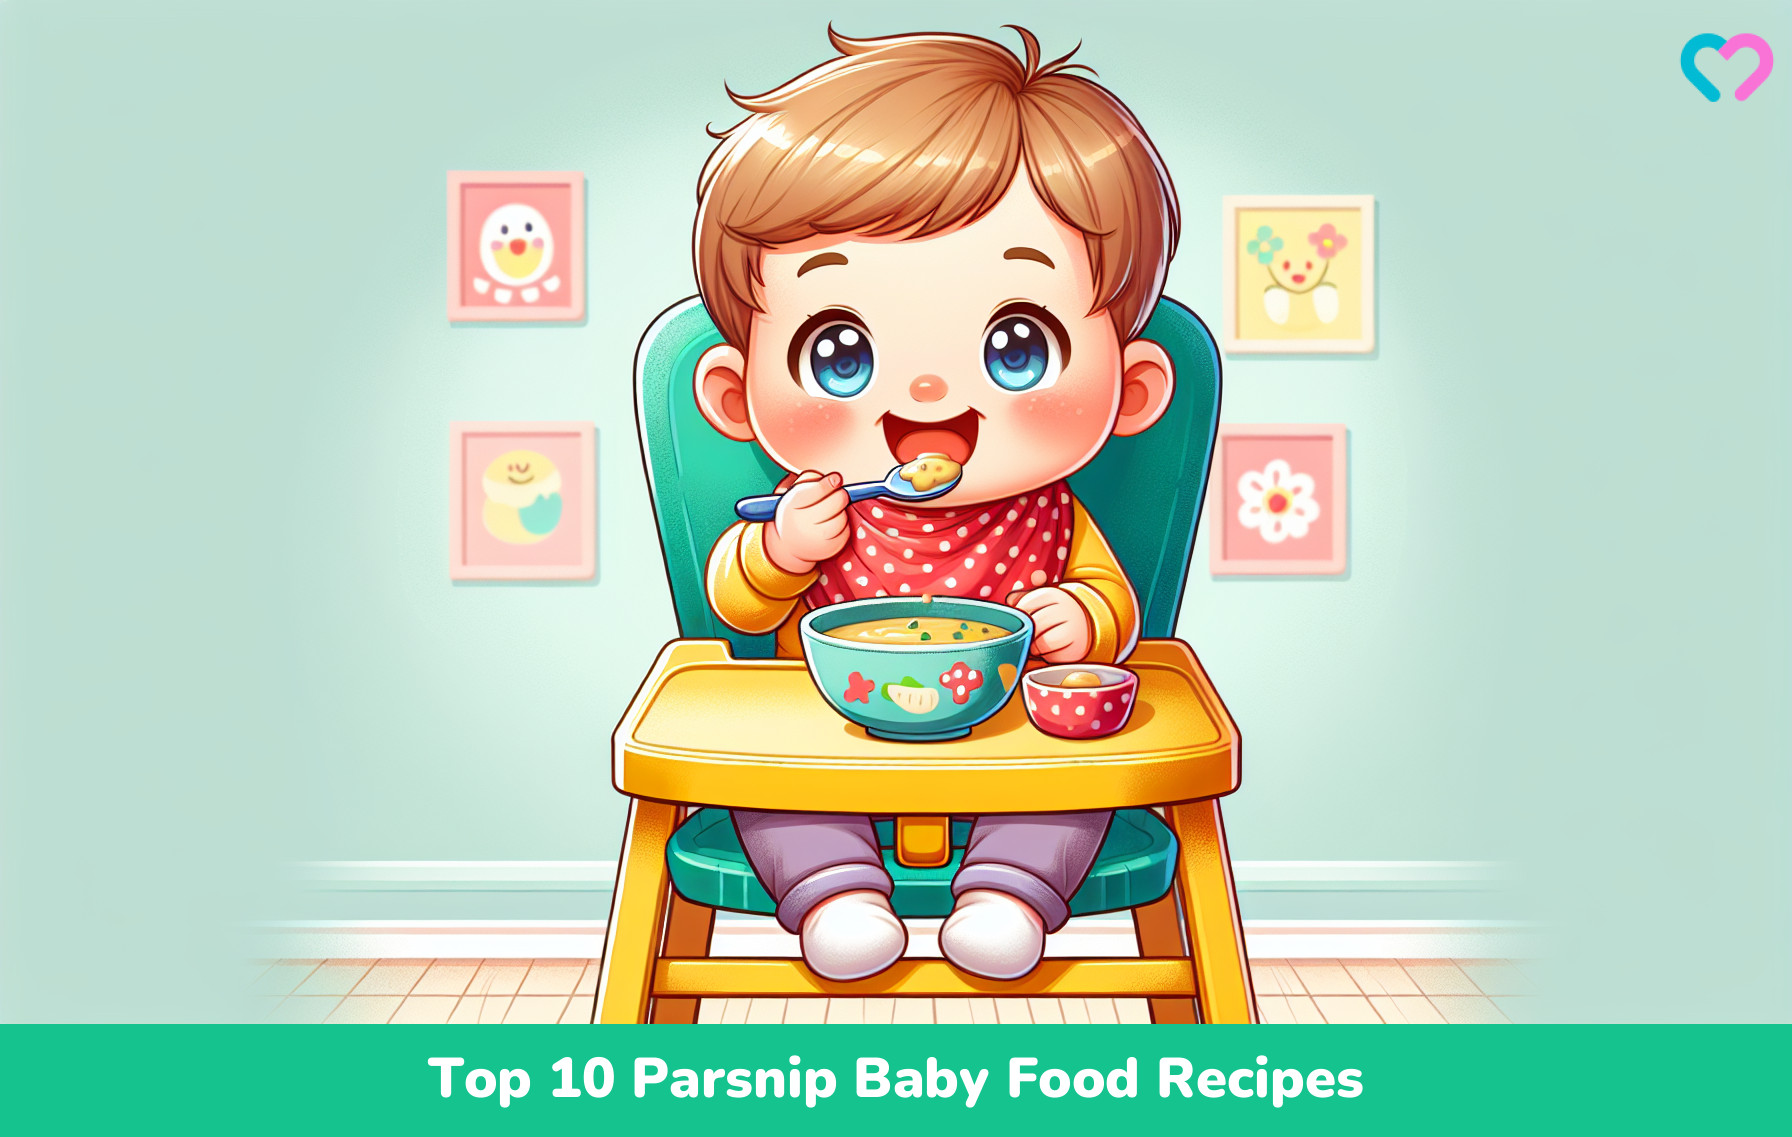 Parsnip Food Recipes for Baby_illustration